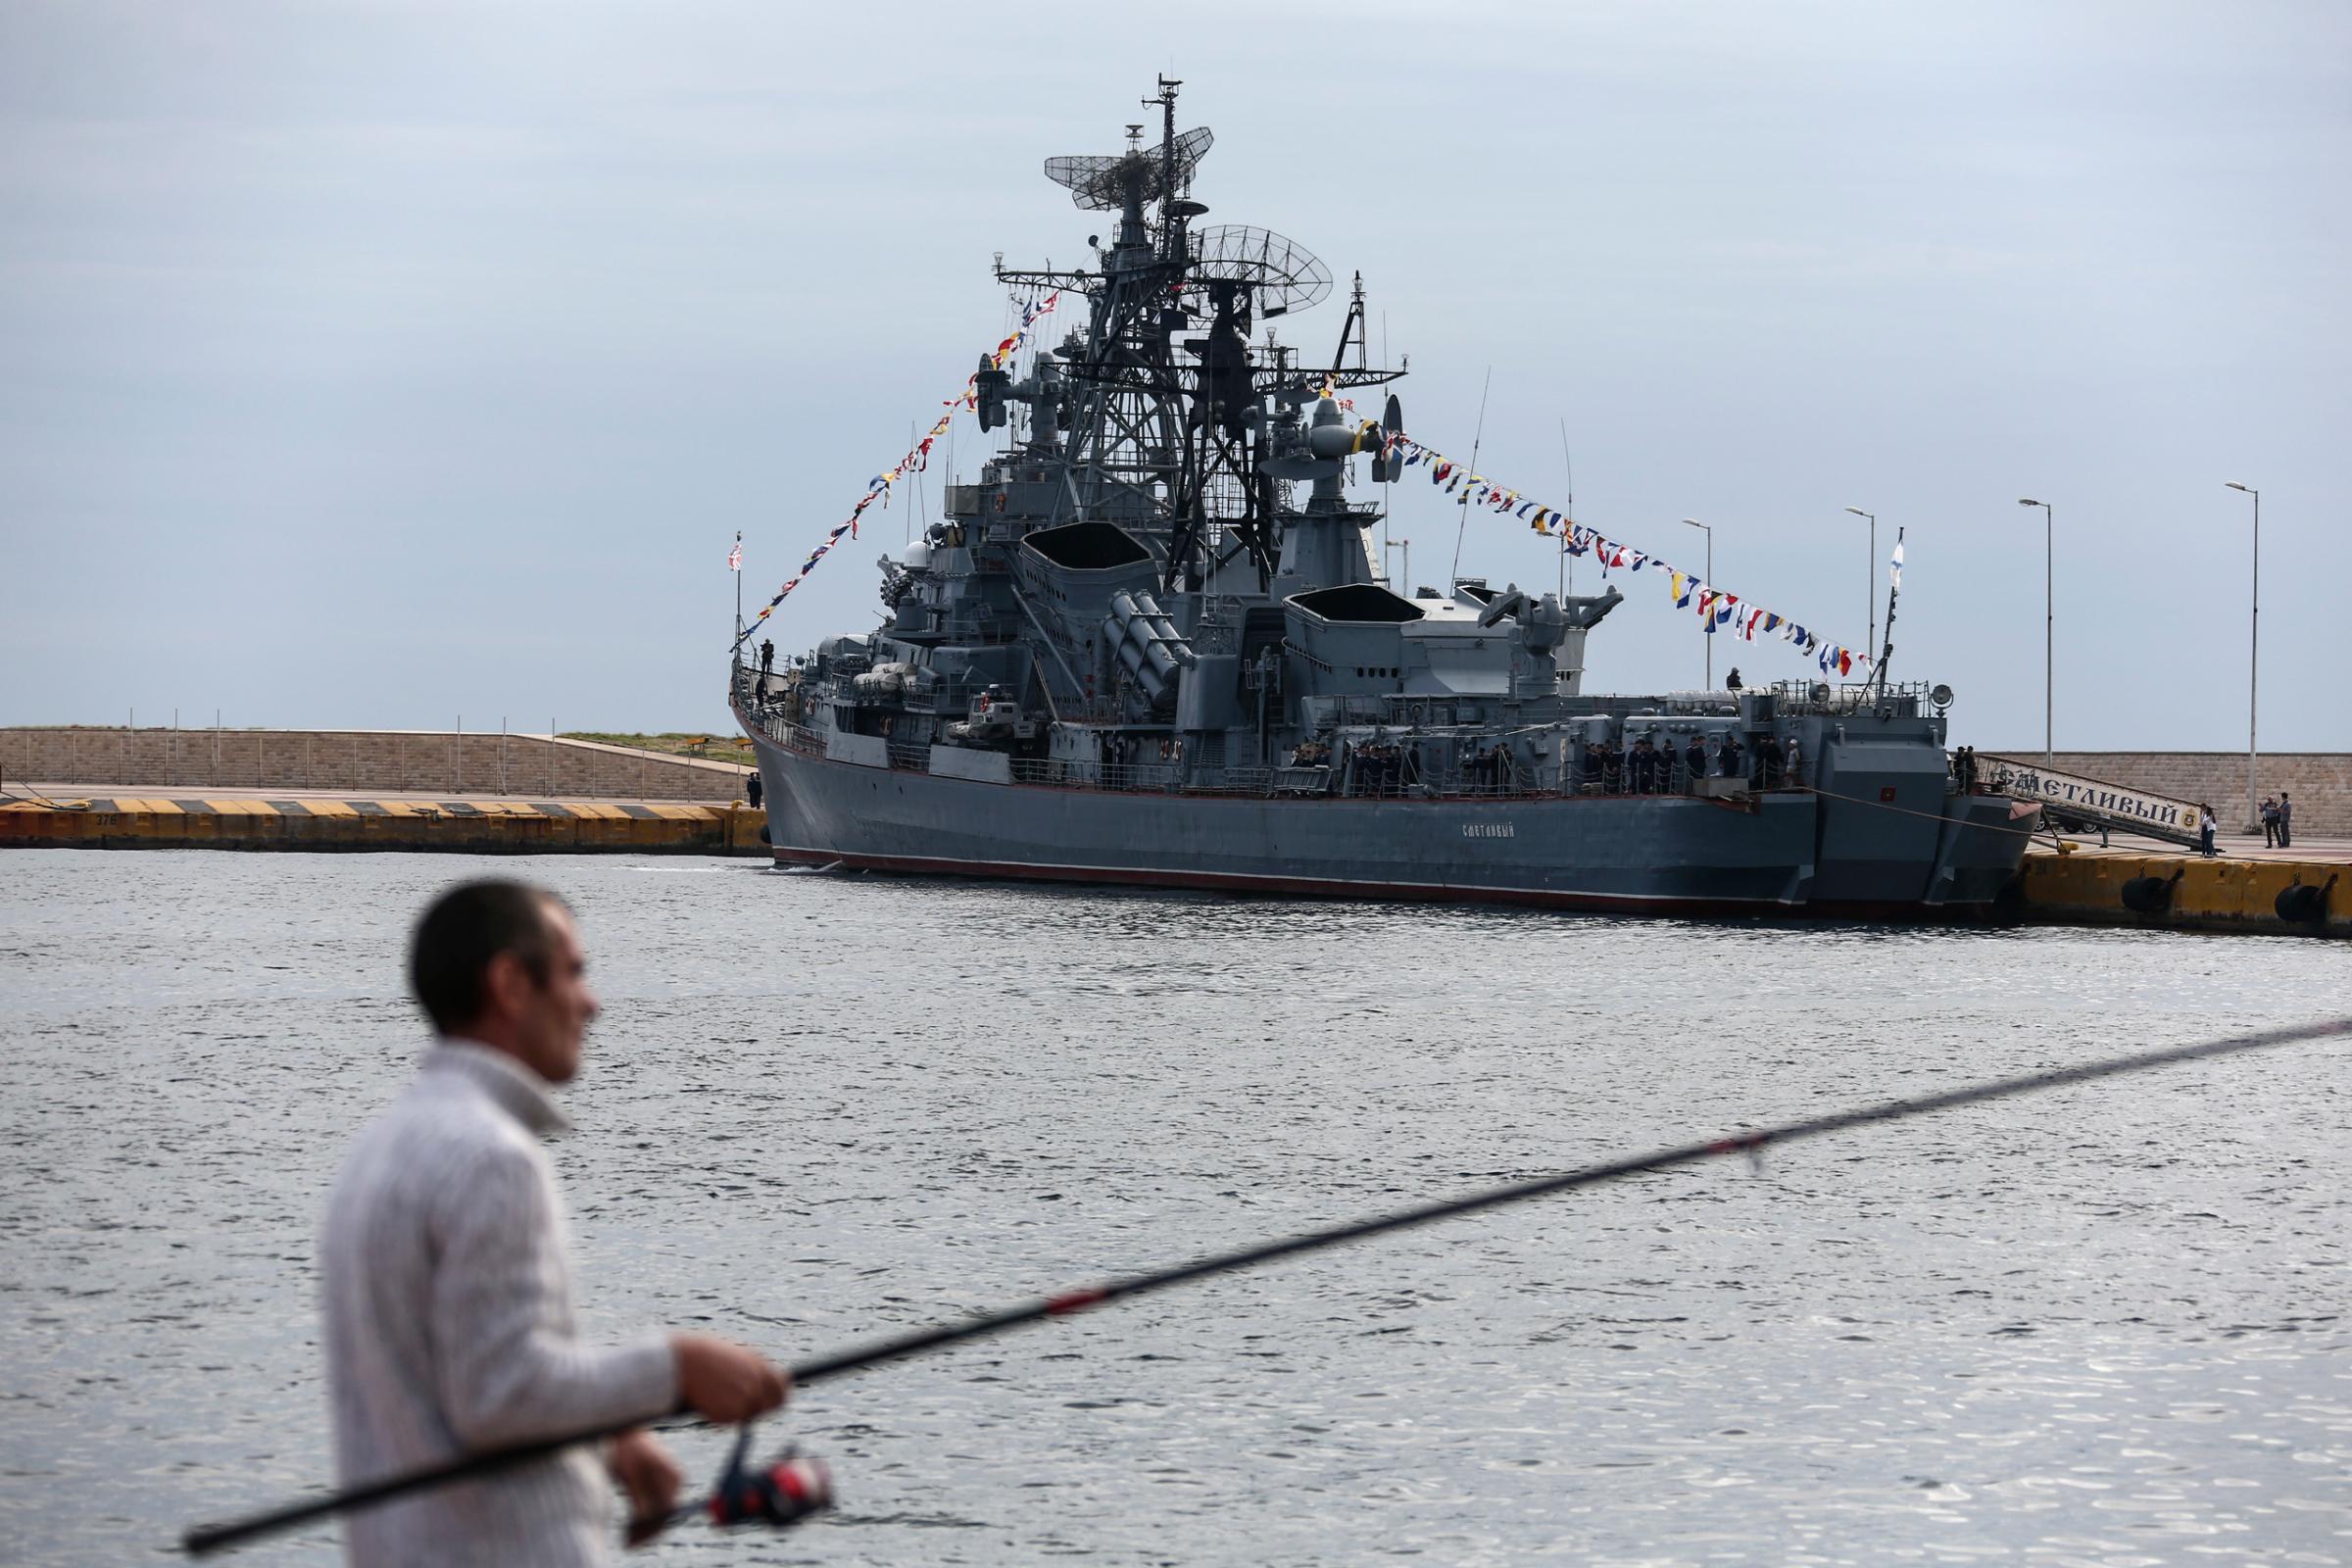 A man fishes near to the Russian Navy missile destroyer Smetlivy, moored at a pier in Piraeus port, near Athens, Sunday, Oct. 30, 2016. The ship left the Crimean port of Sevastopol on Friday and will remain for two days in Piraeus helping to mark the series of cultural and scientific exchange events called "Russia-Greece Year", before joining Russia's battle group on its way to Syria.(AP Photo/Yorgos Karahalis)